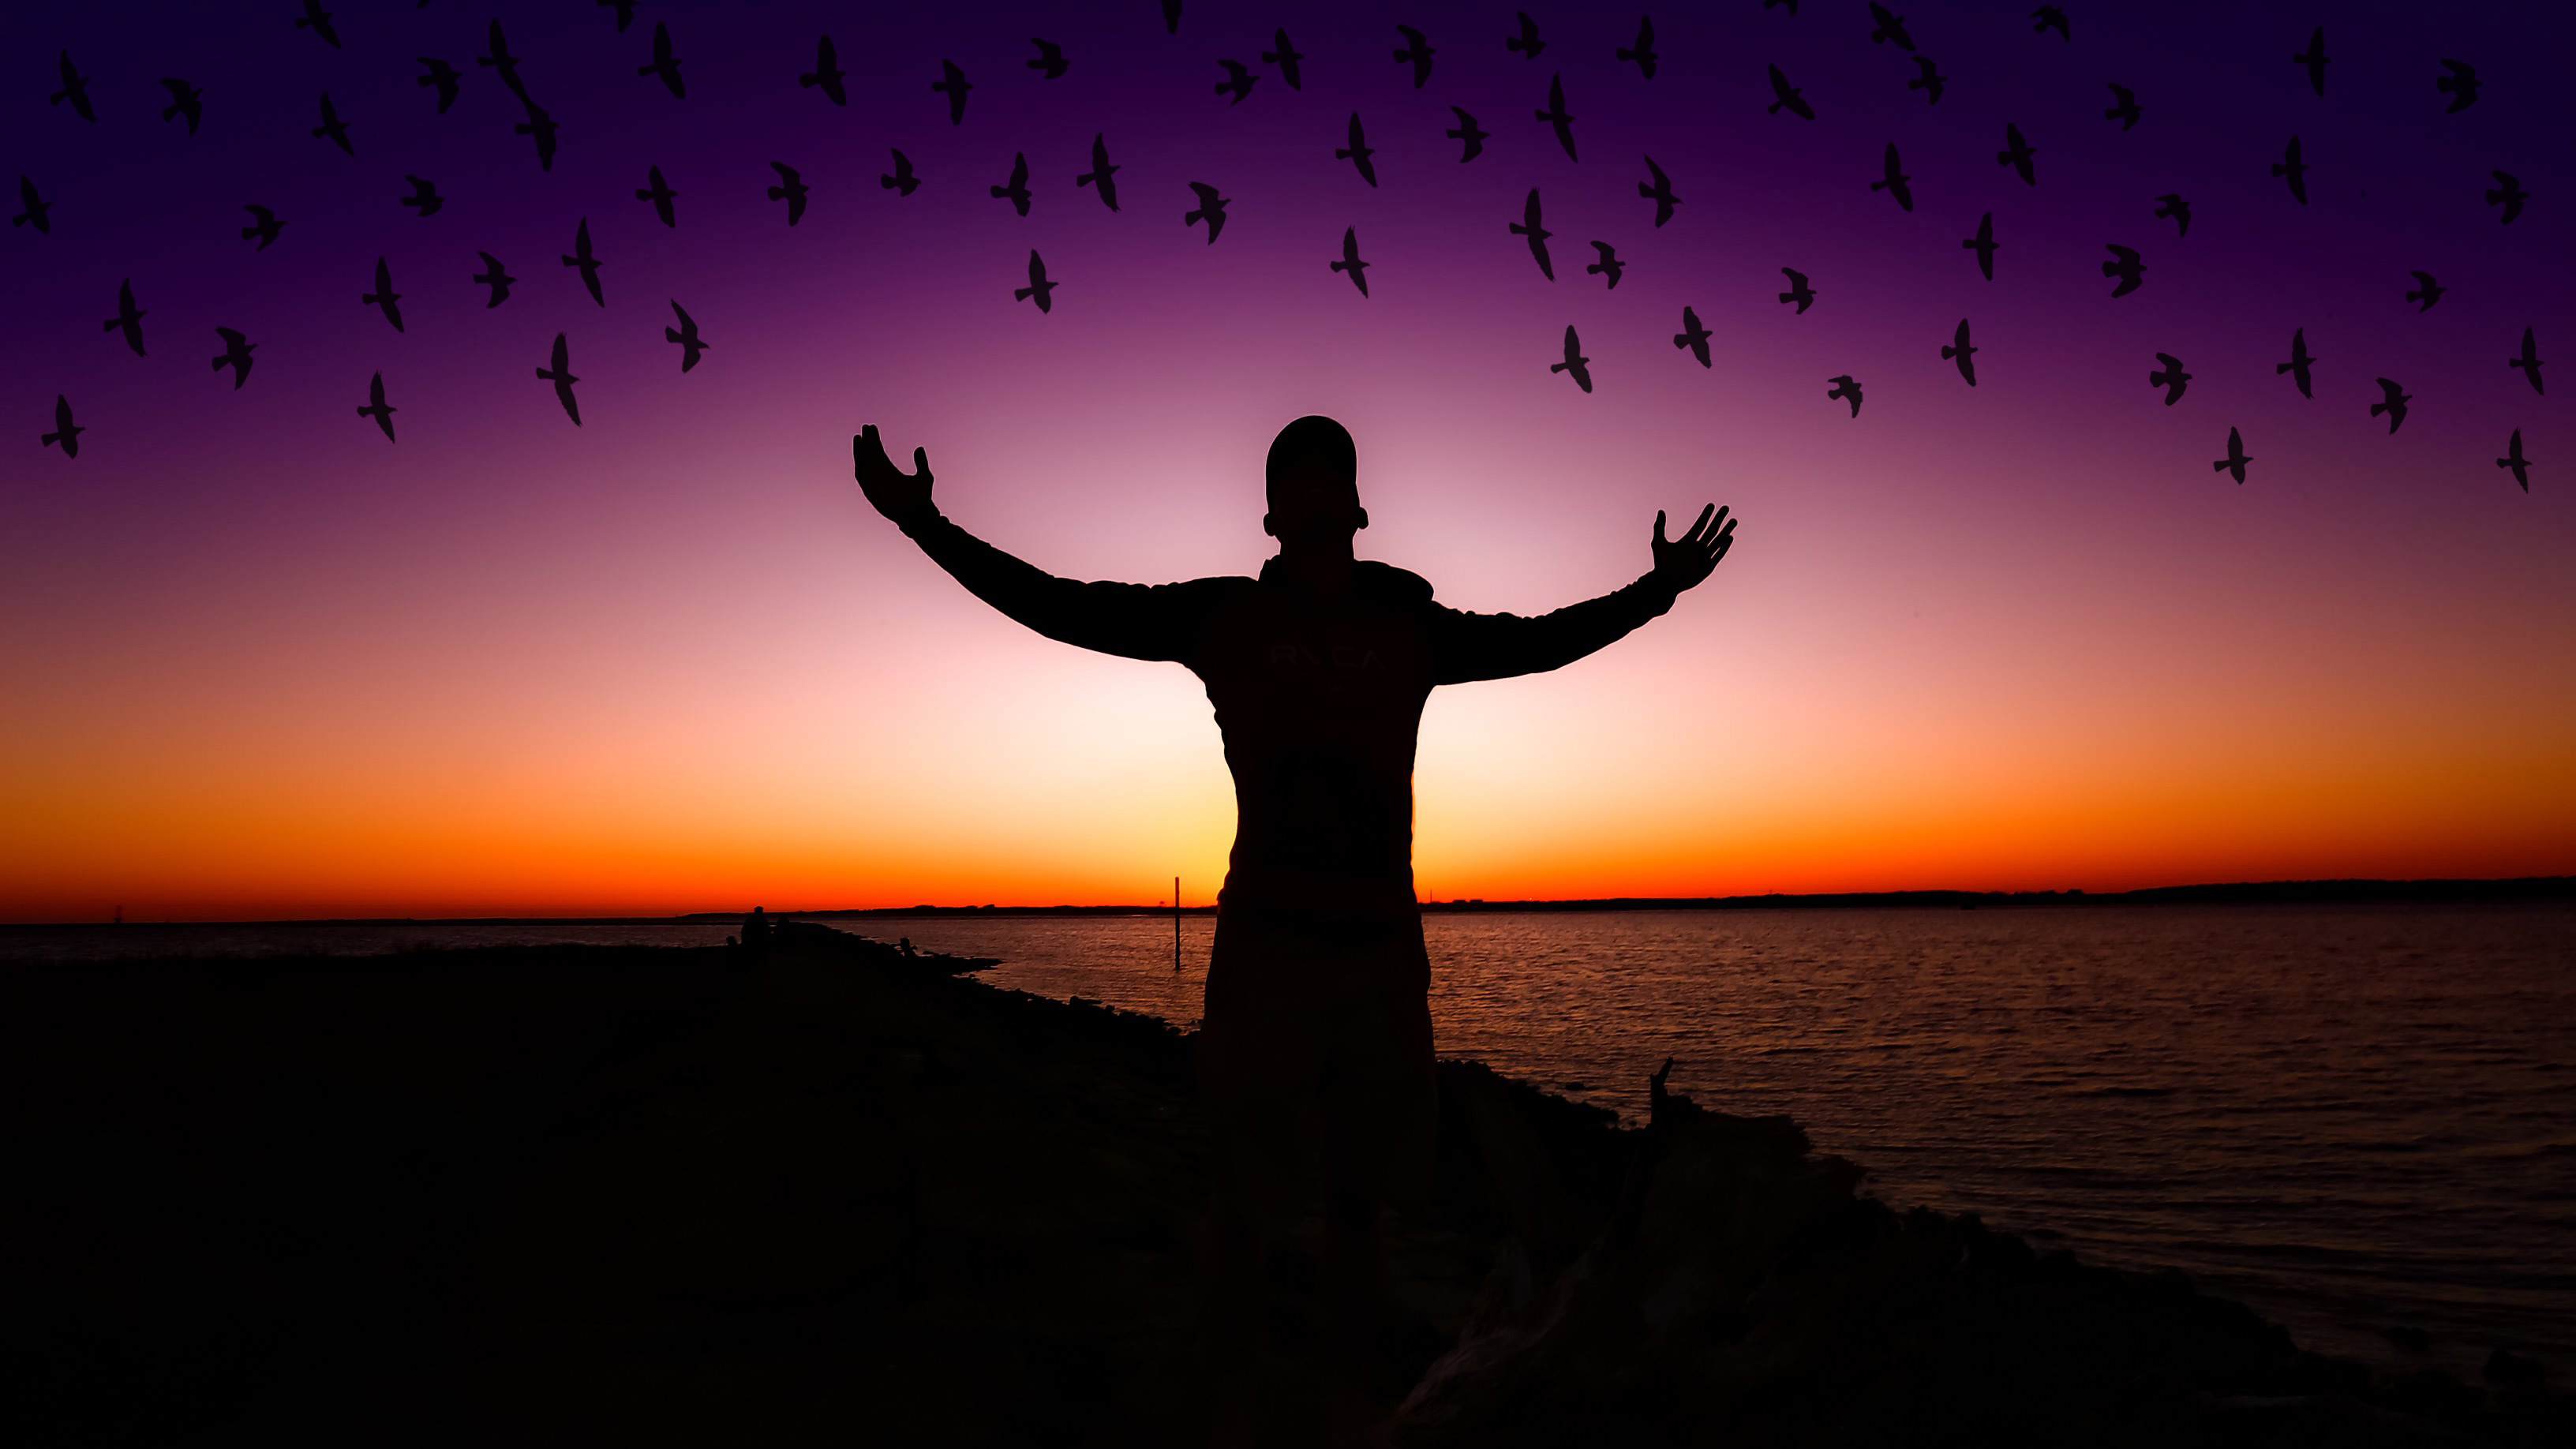 #Birds, #Happy mood, #Silhouette, #Exciting, #Sunset HD Wallpaper